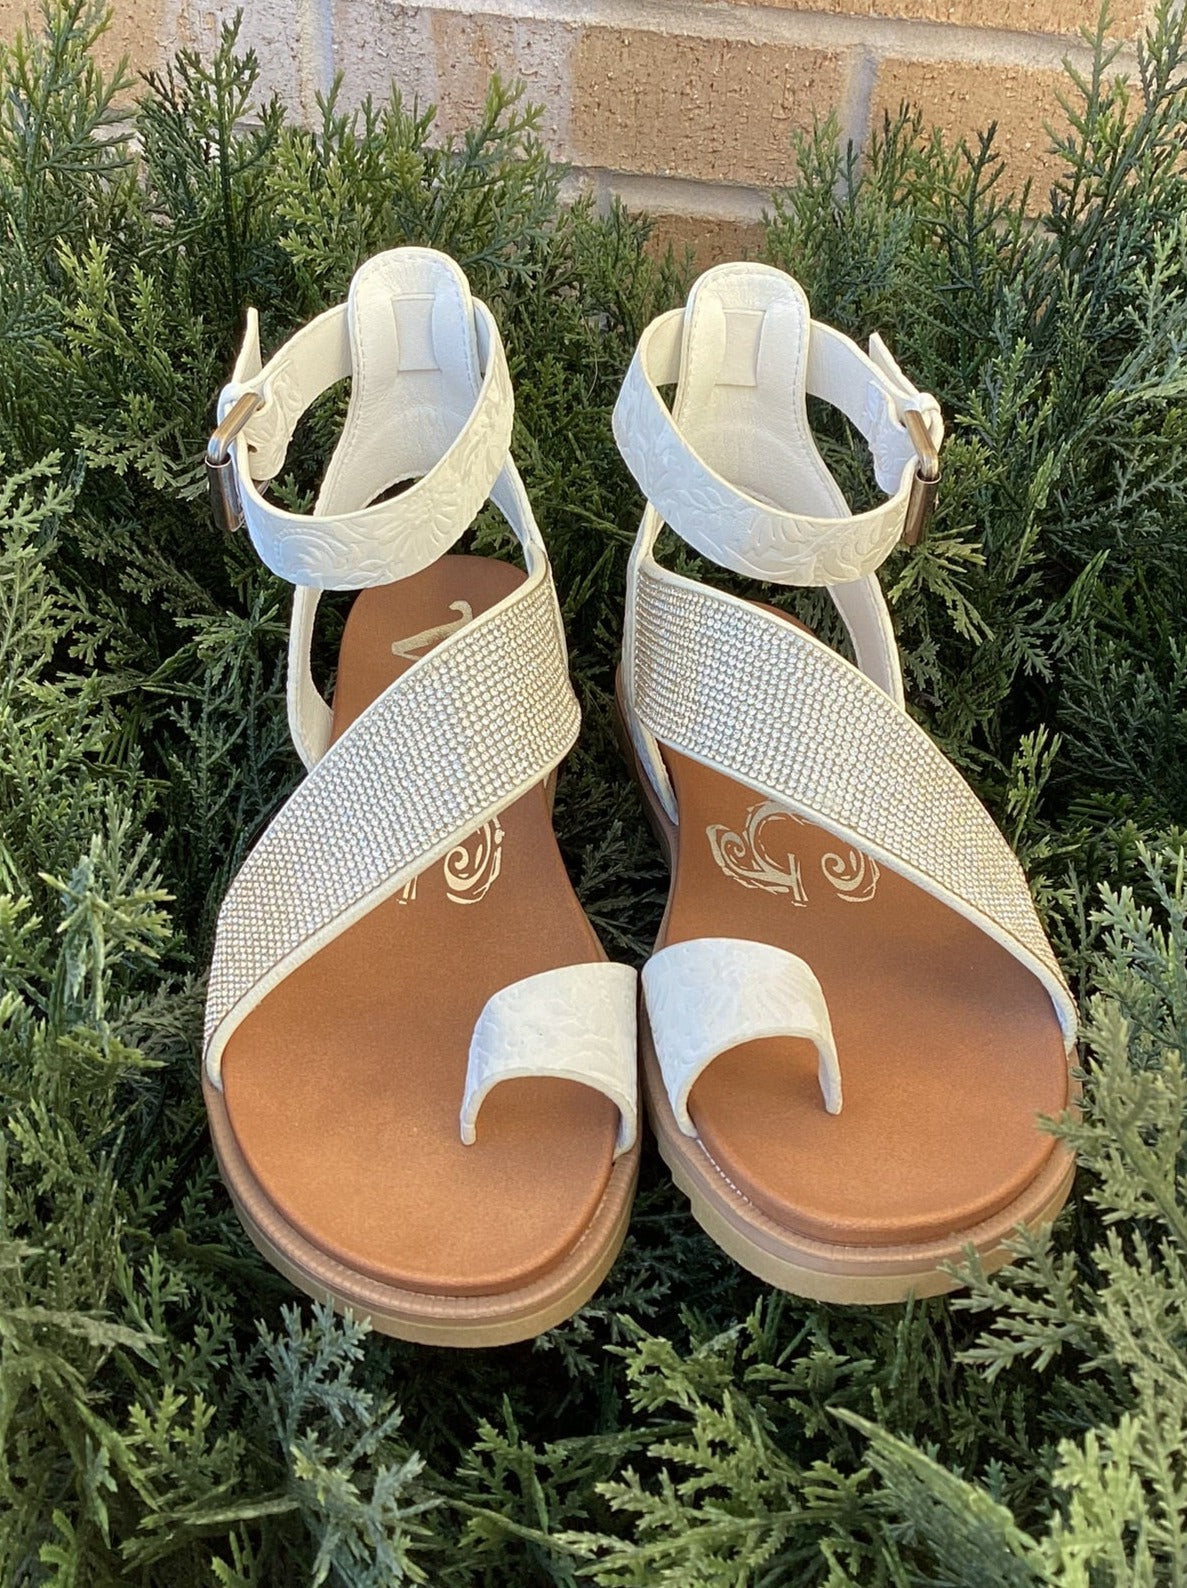 FRONT VIEW OF SANDALS